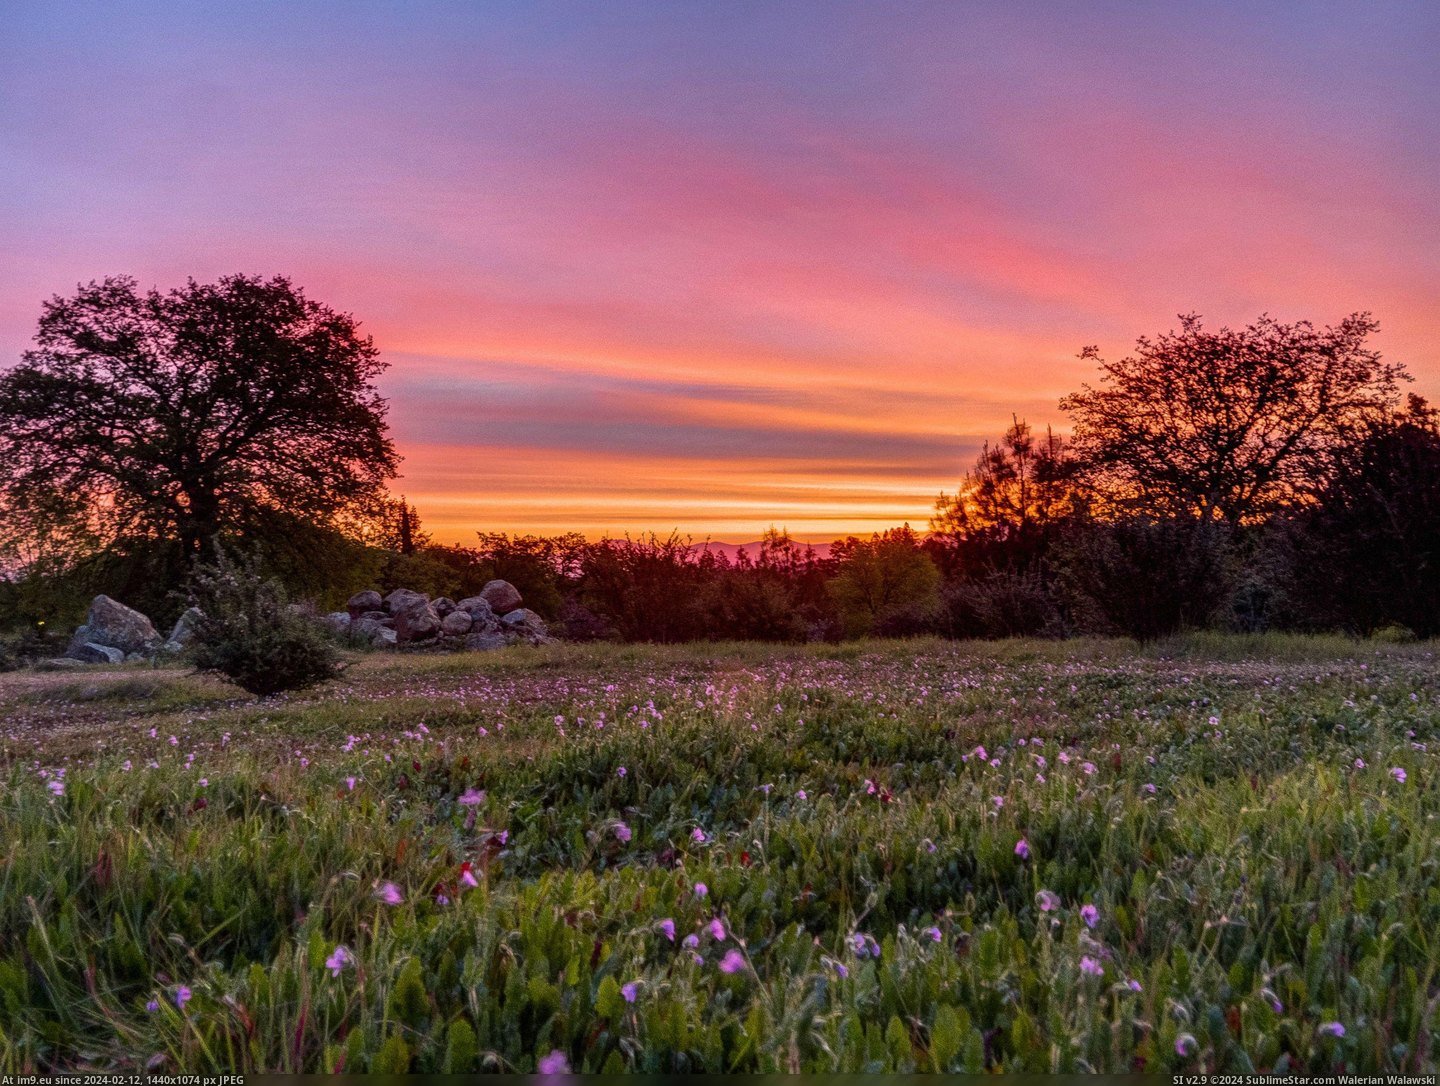 #California #Sunrise #3000x2250 #Redding #Backyard #March [Earthporn] Today's (March 10, 2015) sunrise from my backyard in Redding California. [3000x2250] Pic. (Image of album My r/EARTHPORN favs))